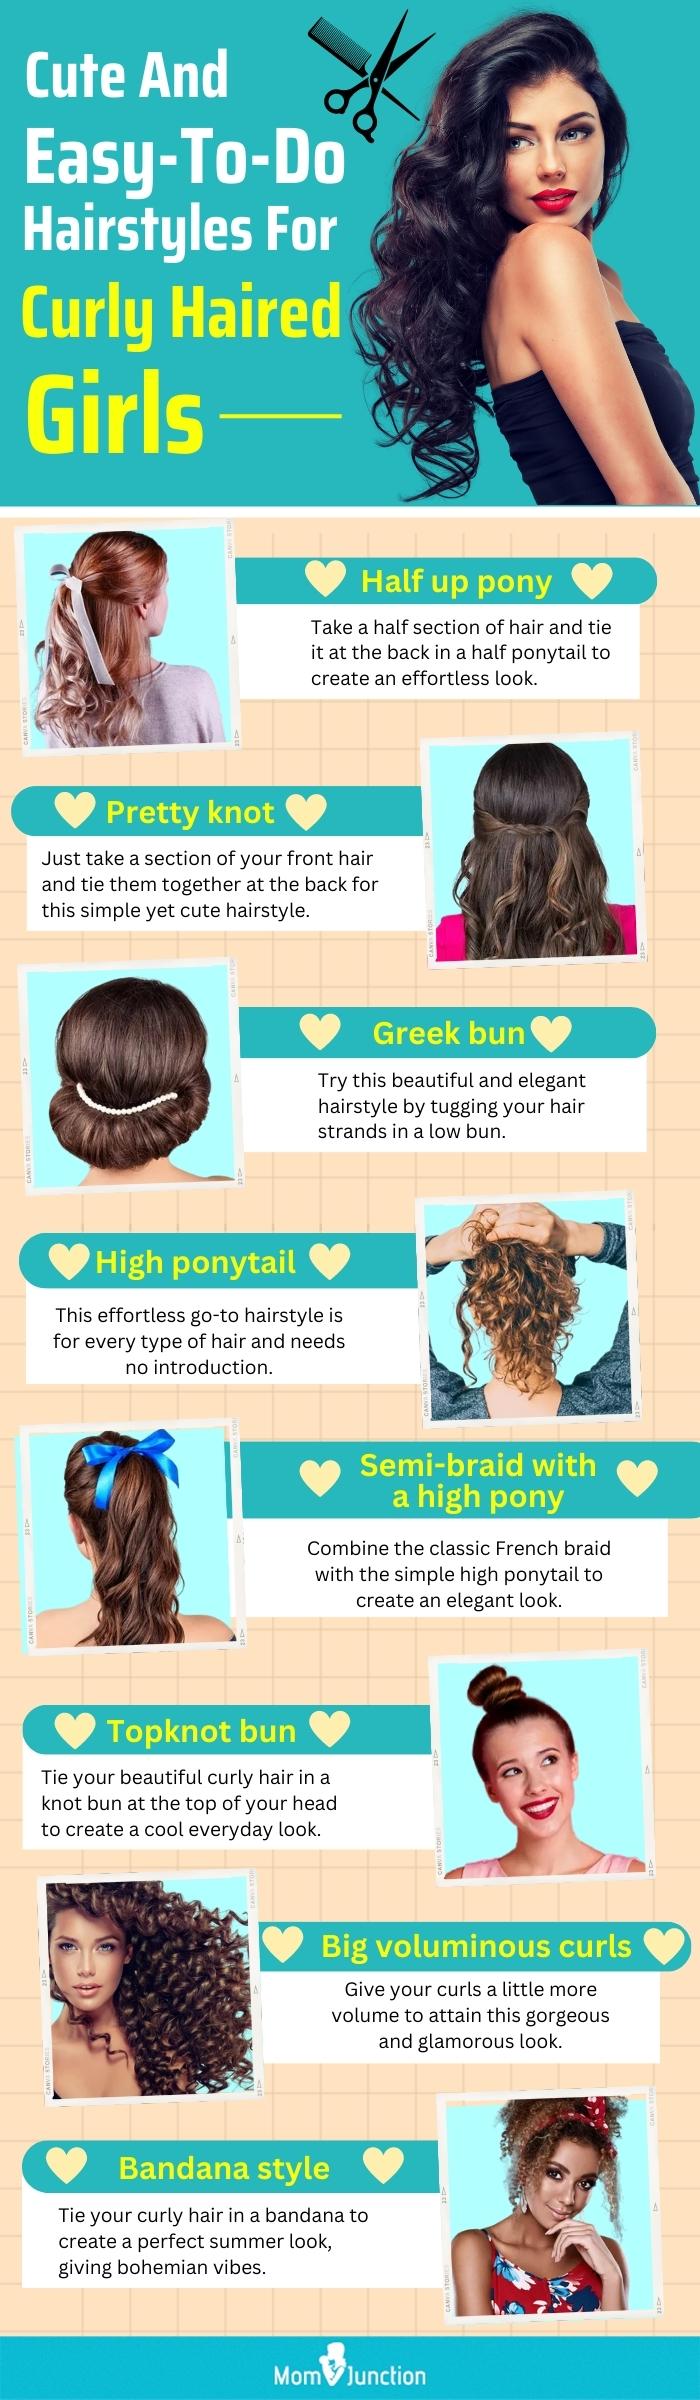 15 simple and fast hairstyles for girls who hate to do their hair-hkpdtq2012.edu.vn